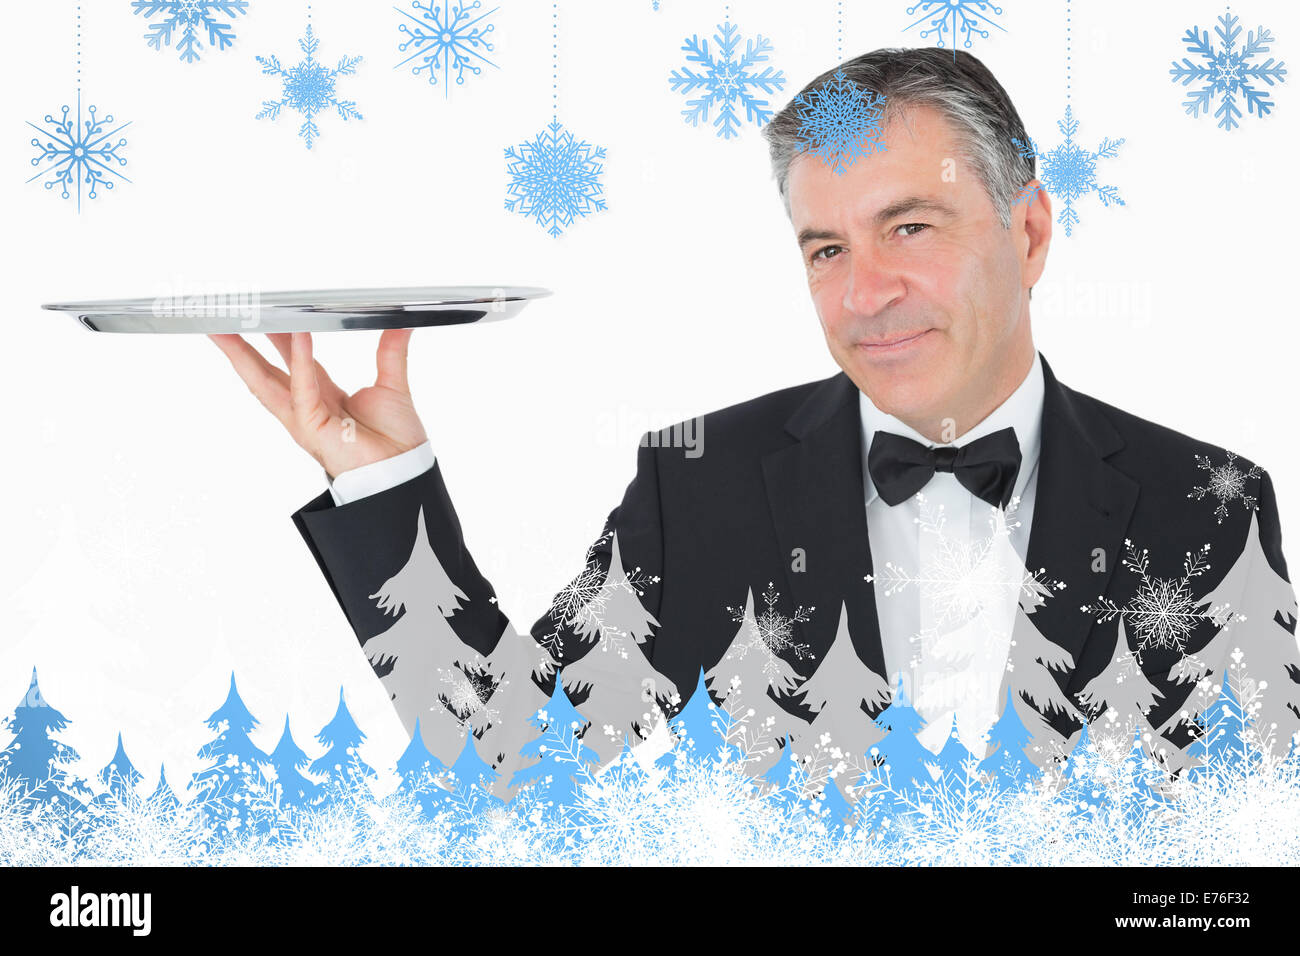 Composite image of welldressed waiter holding a silver tray Stock Photo